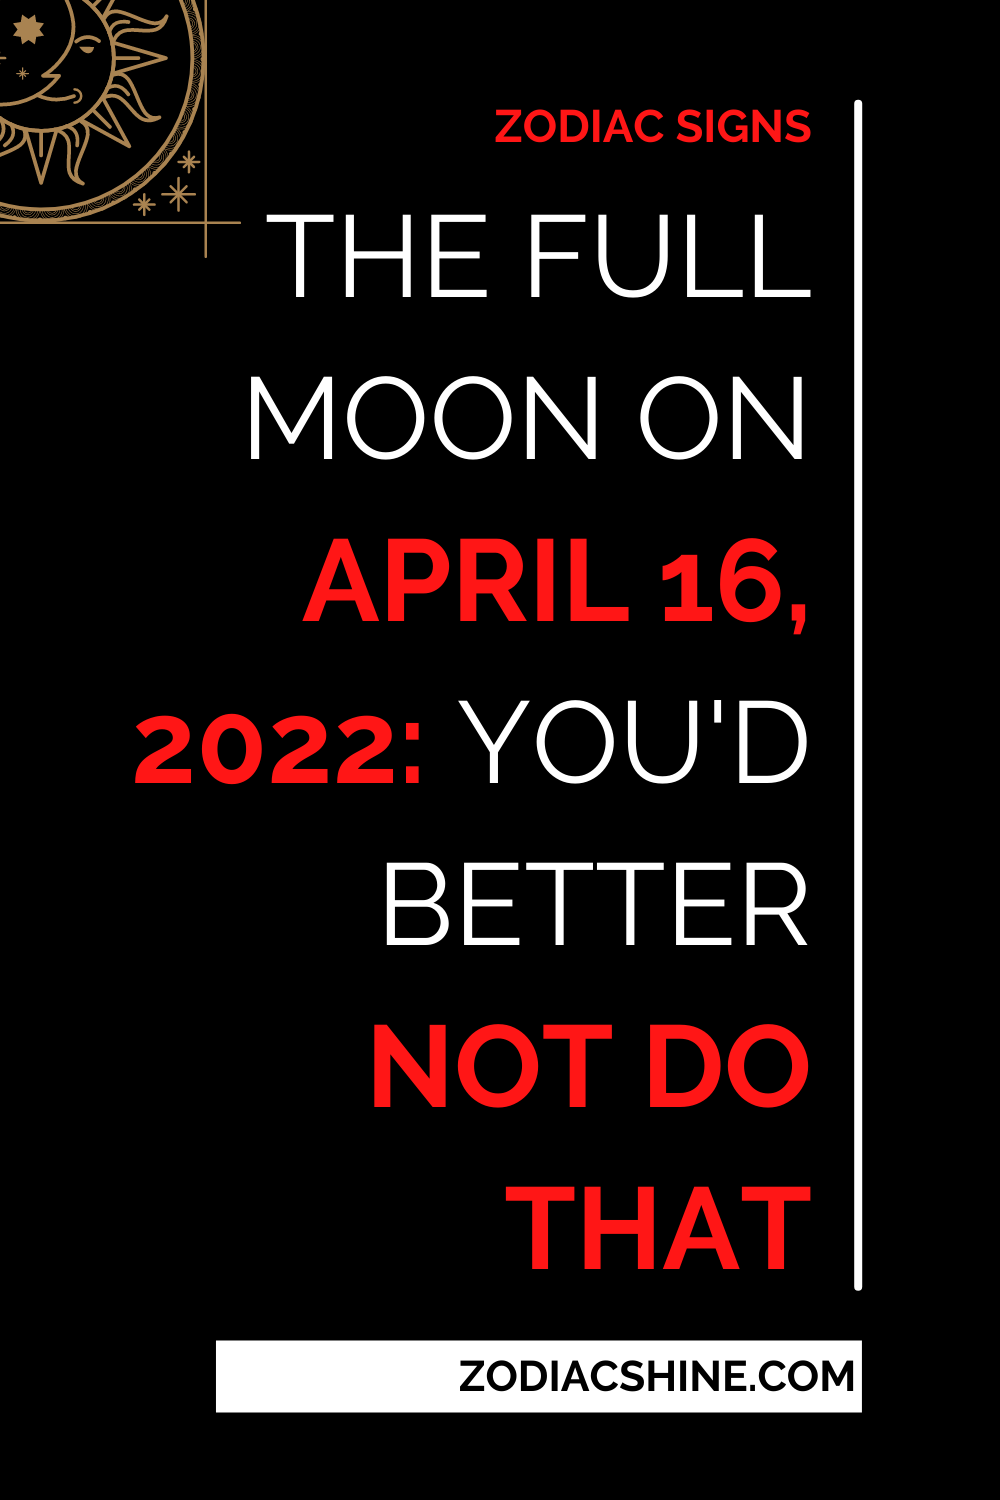 The Full Moon On April 16 2022: You'd Better Not Do That